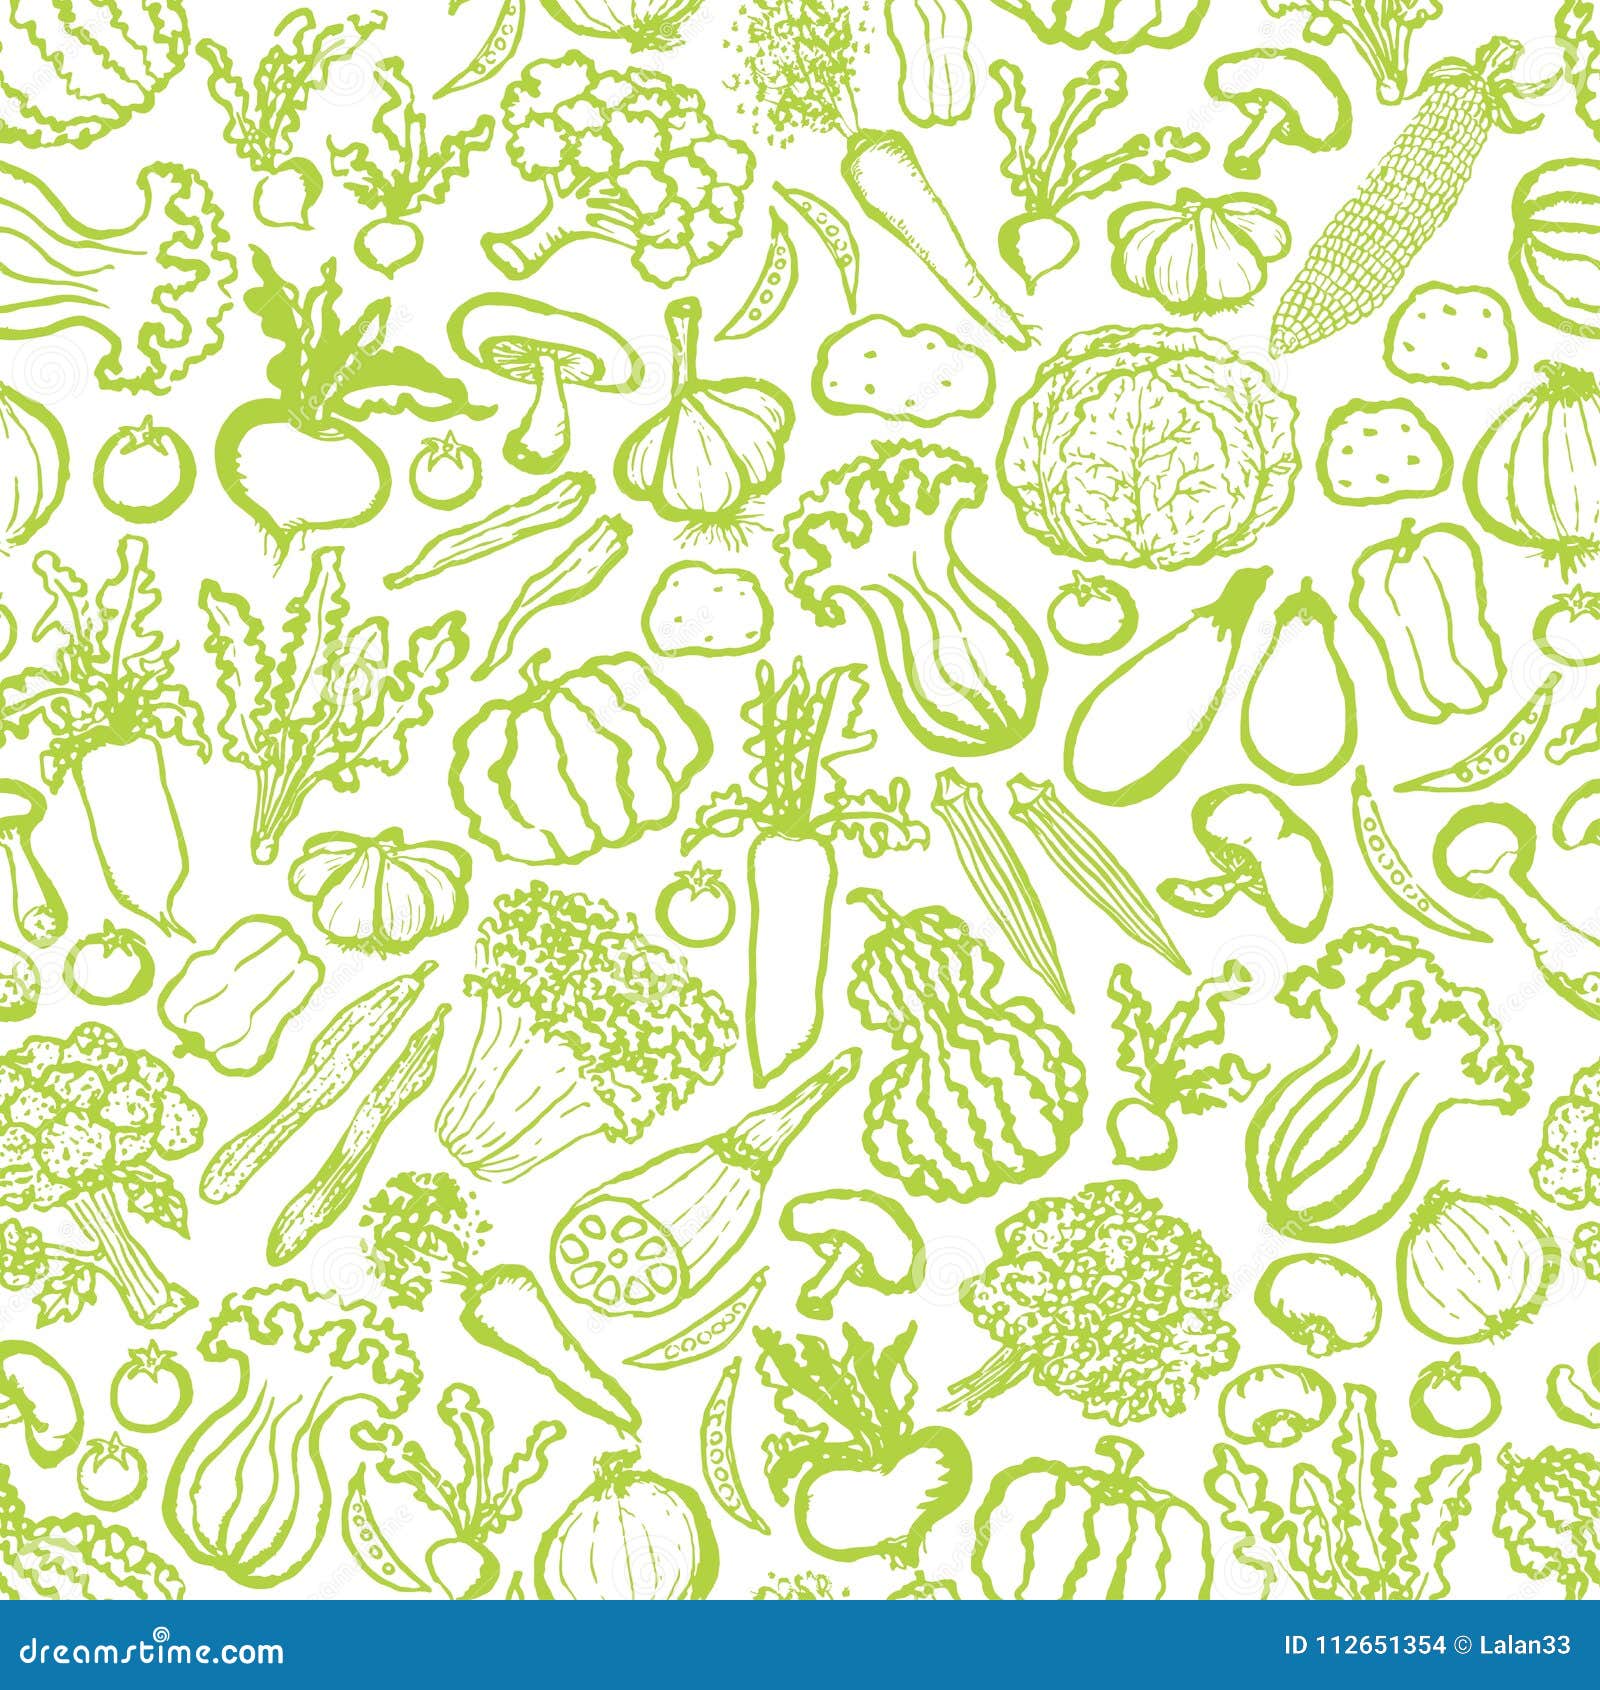 Background with Hand Drawn Green Vegetables. Stock Vector - Illustration of  lettuce, champignon: 112651354